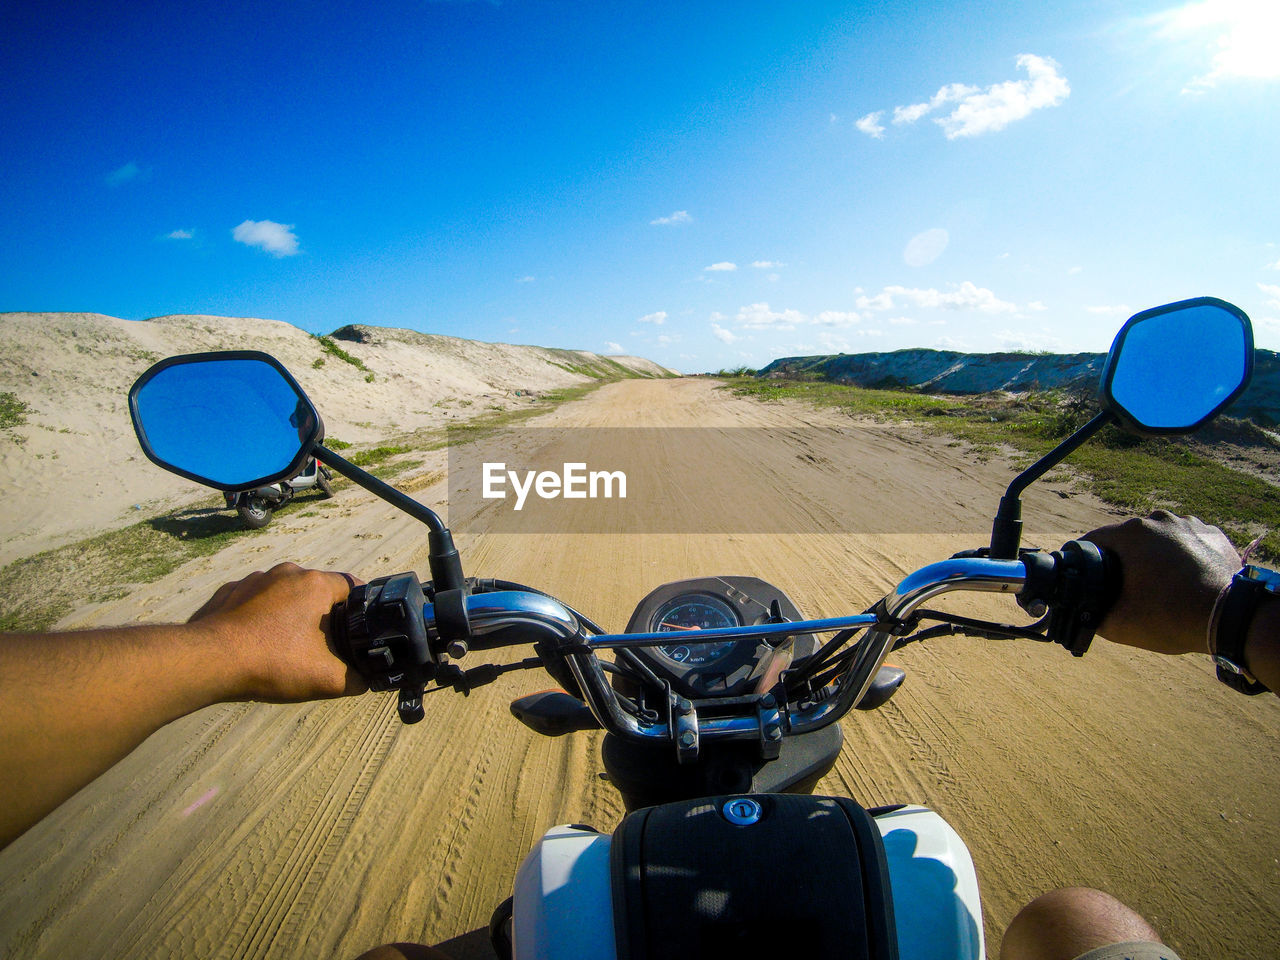 Cropped image of man riding motorcycle on dirt road